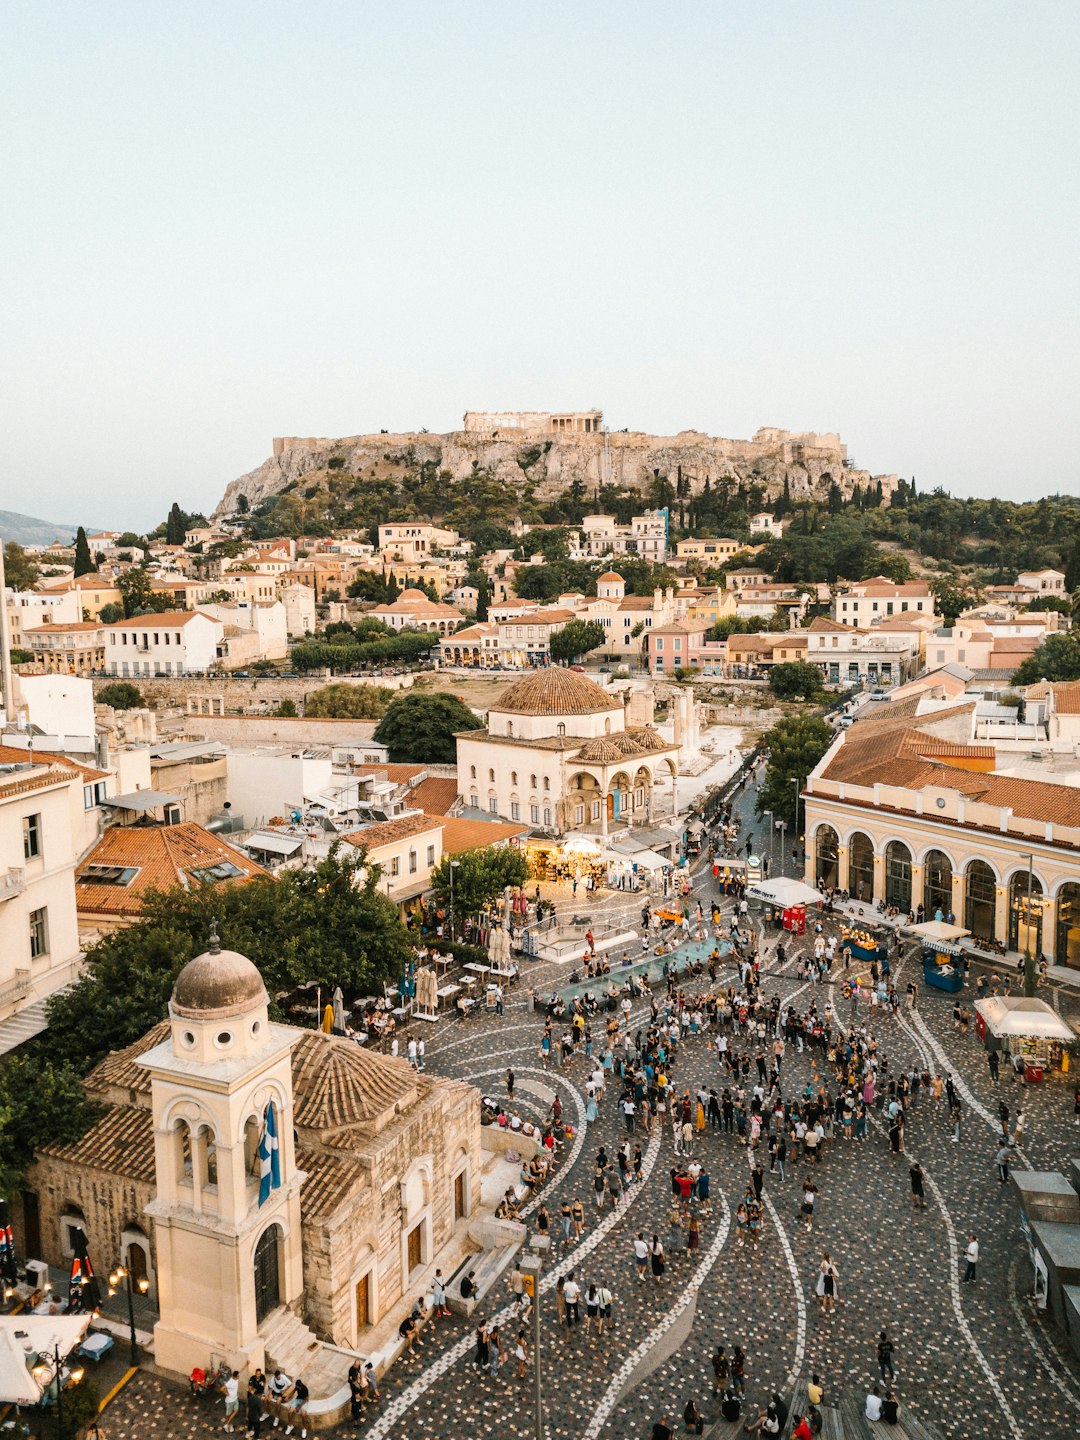 Athens travel guide